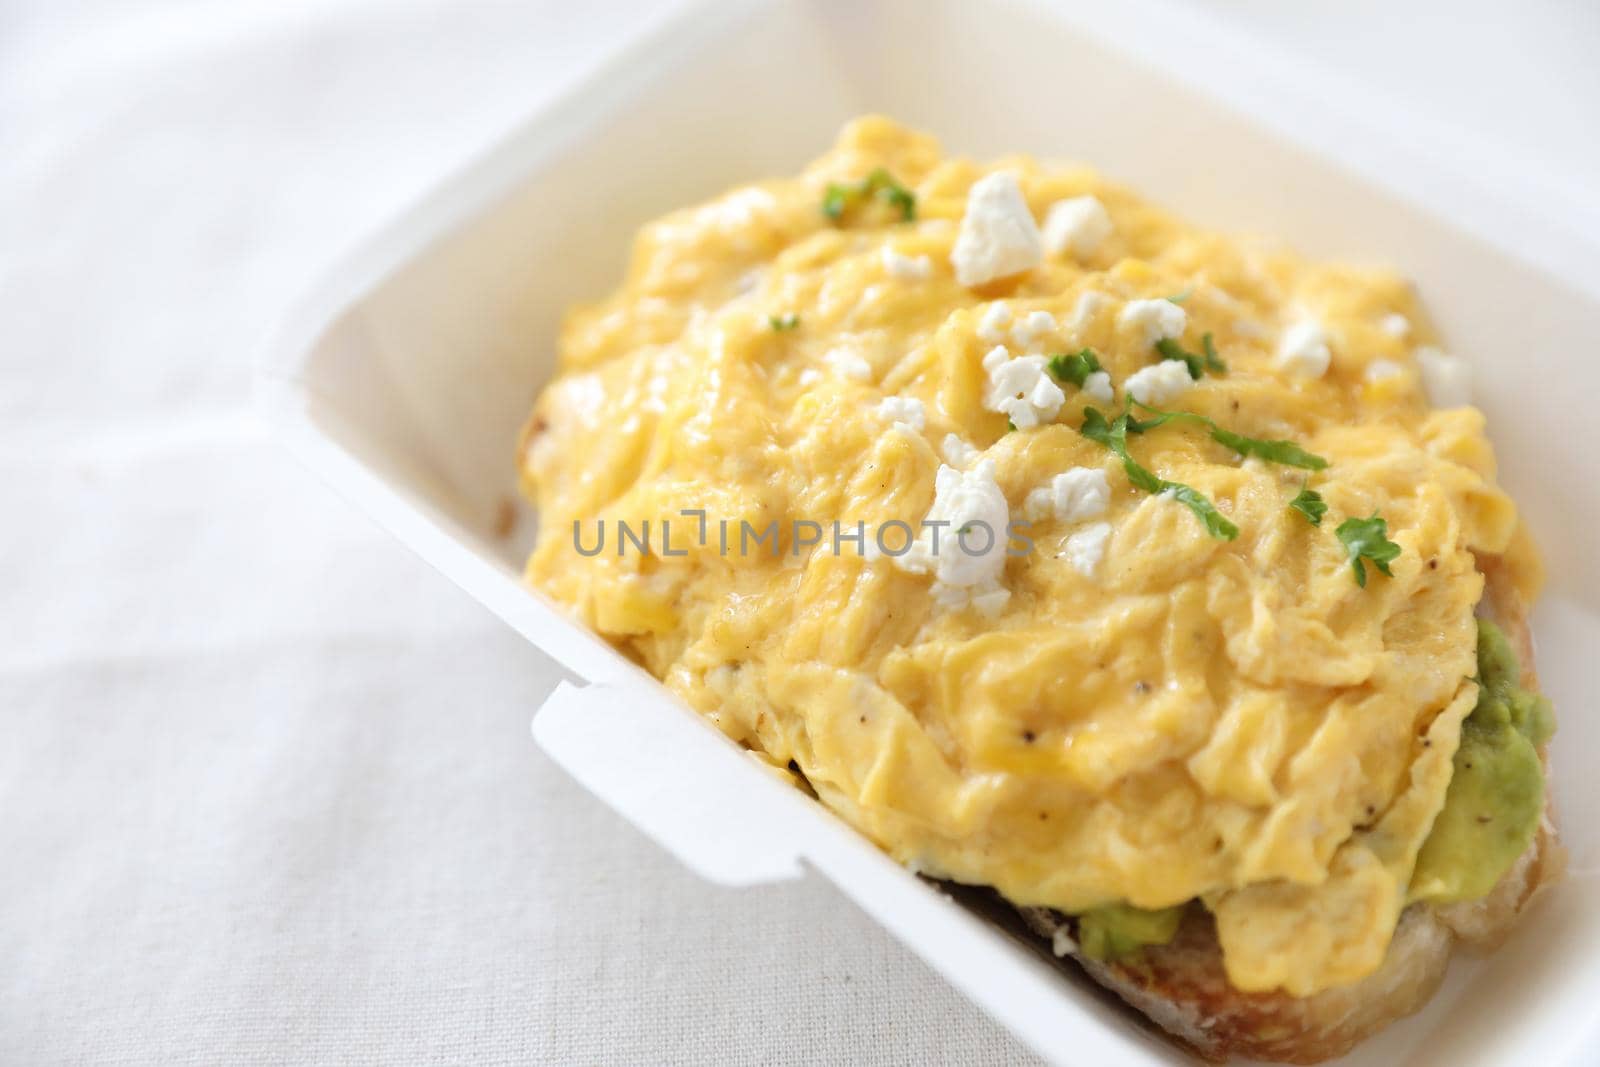 Avocado and scrambled eggs toast with delivery package in white background by piyato